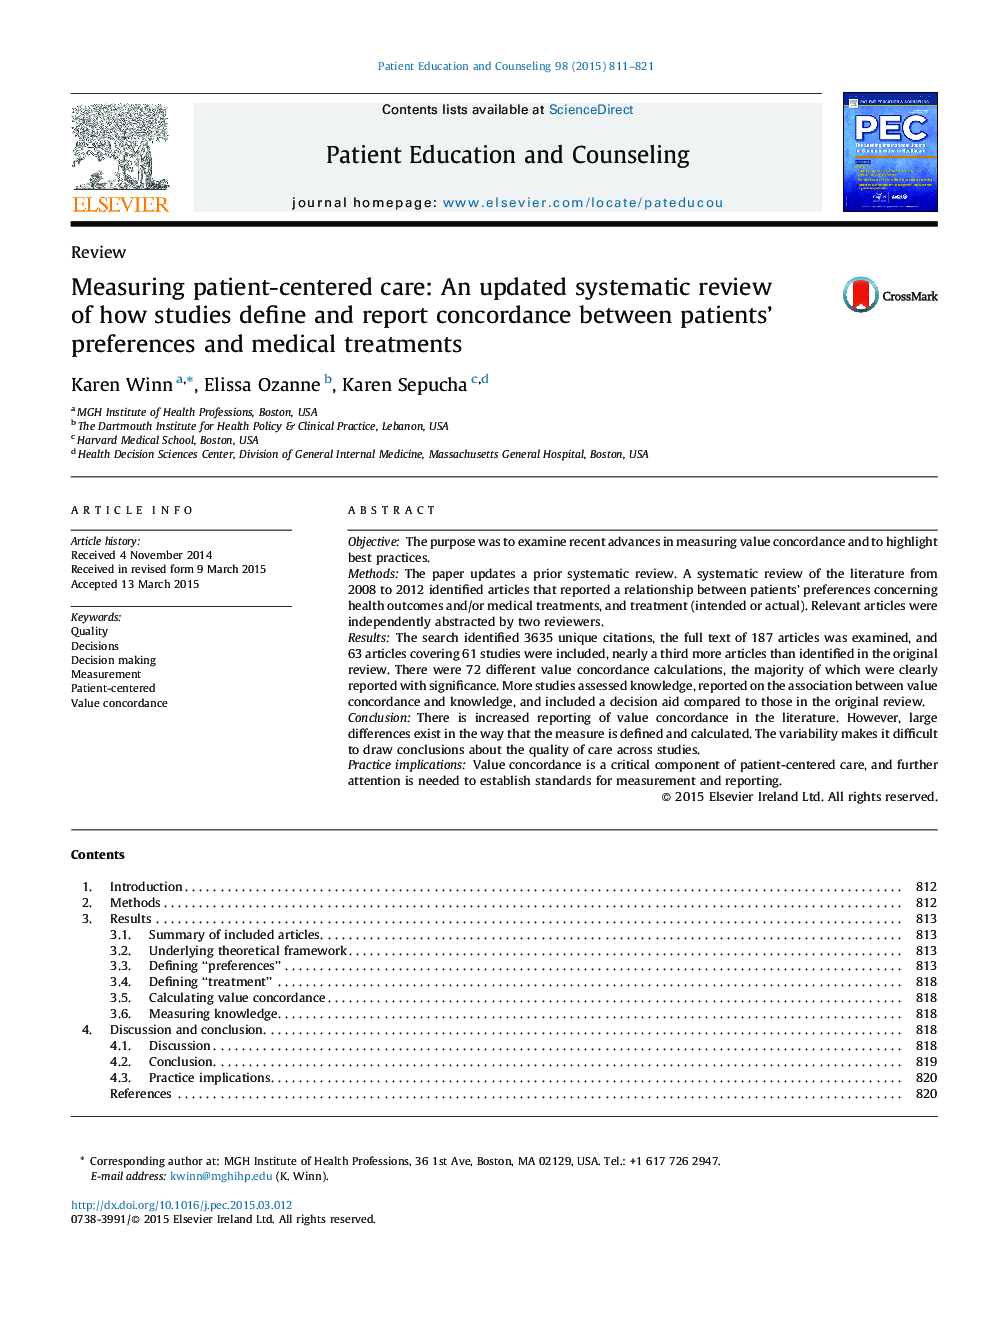 Measuring patient-centered care: An updated systematic review of how studies define and report concordance between patients' preferences and medical treatments